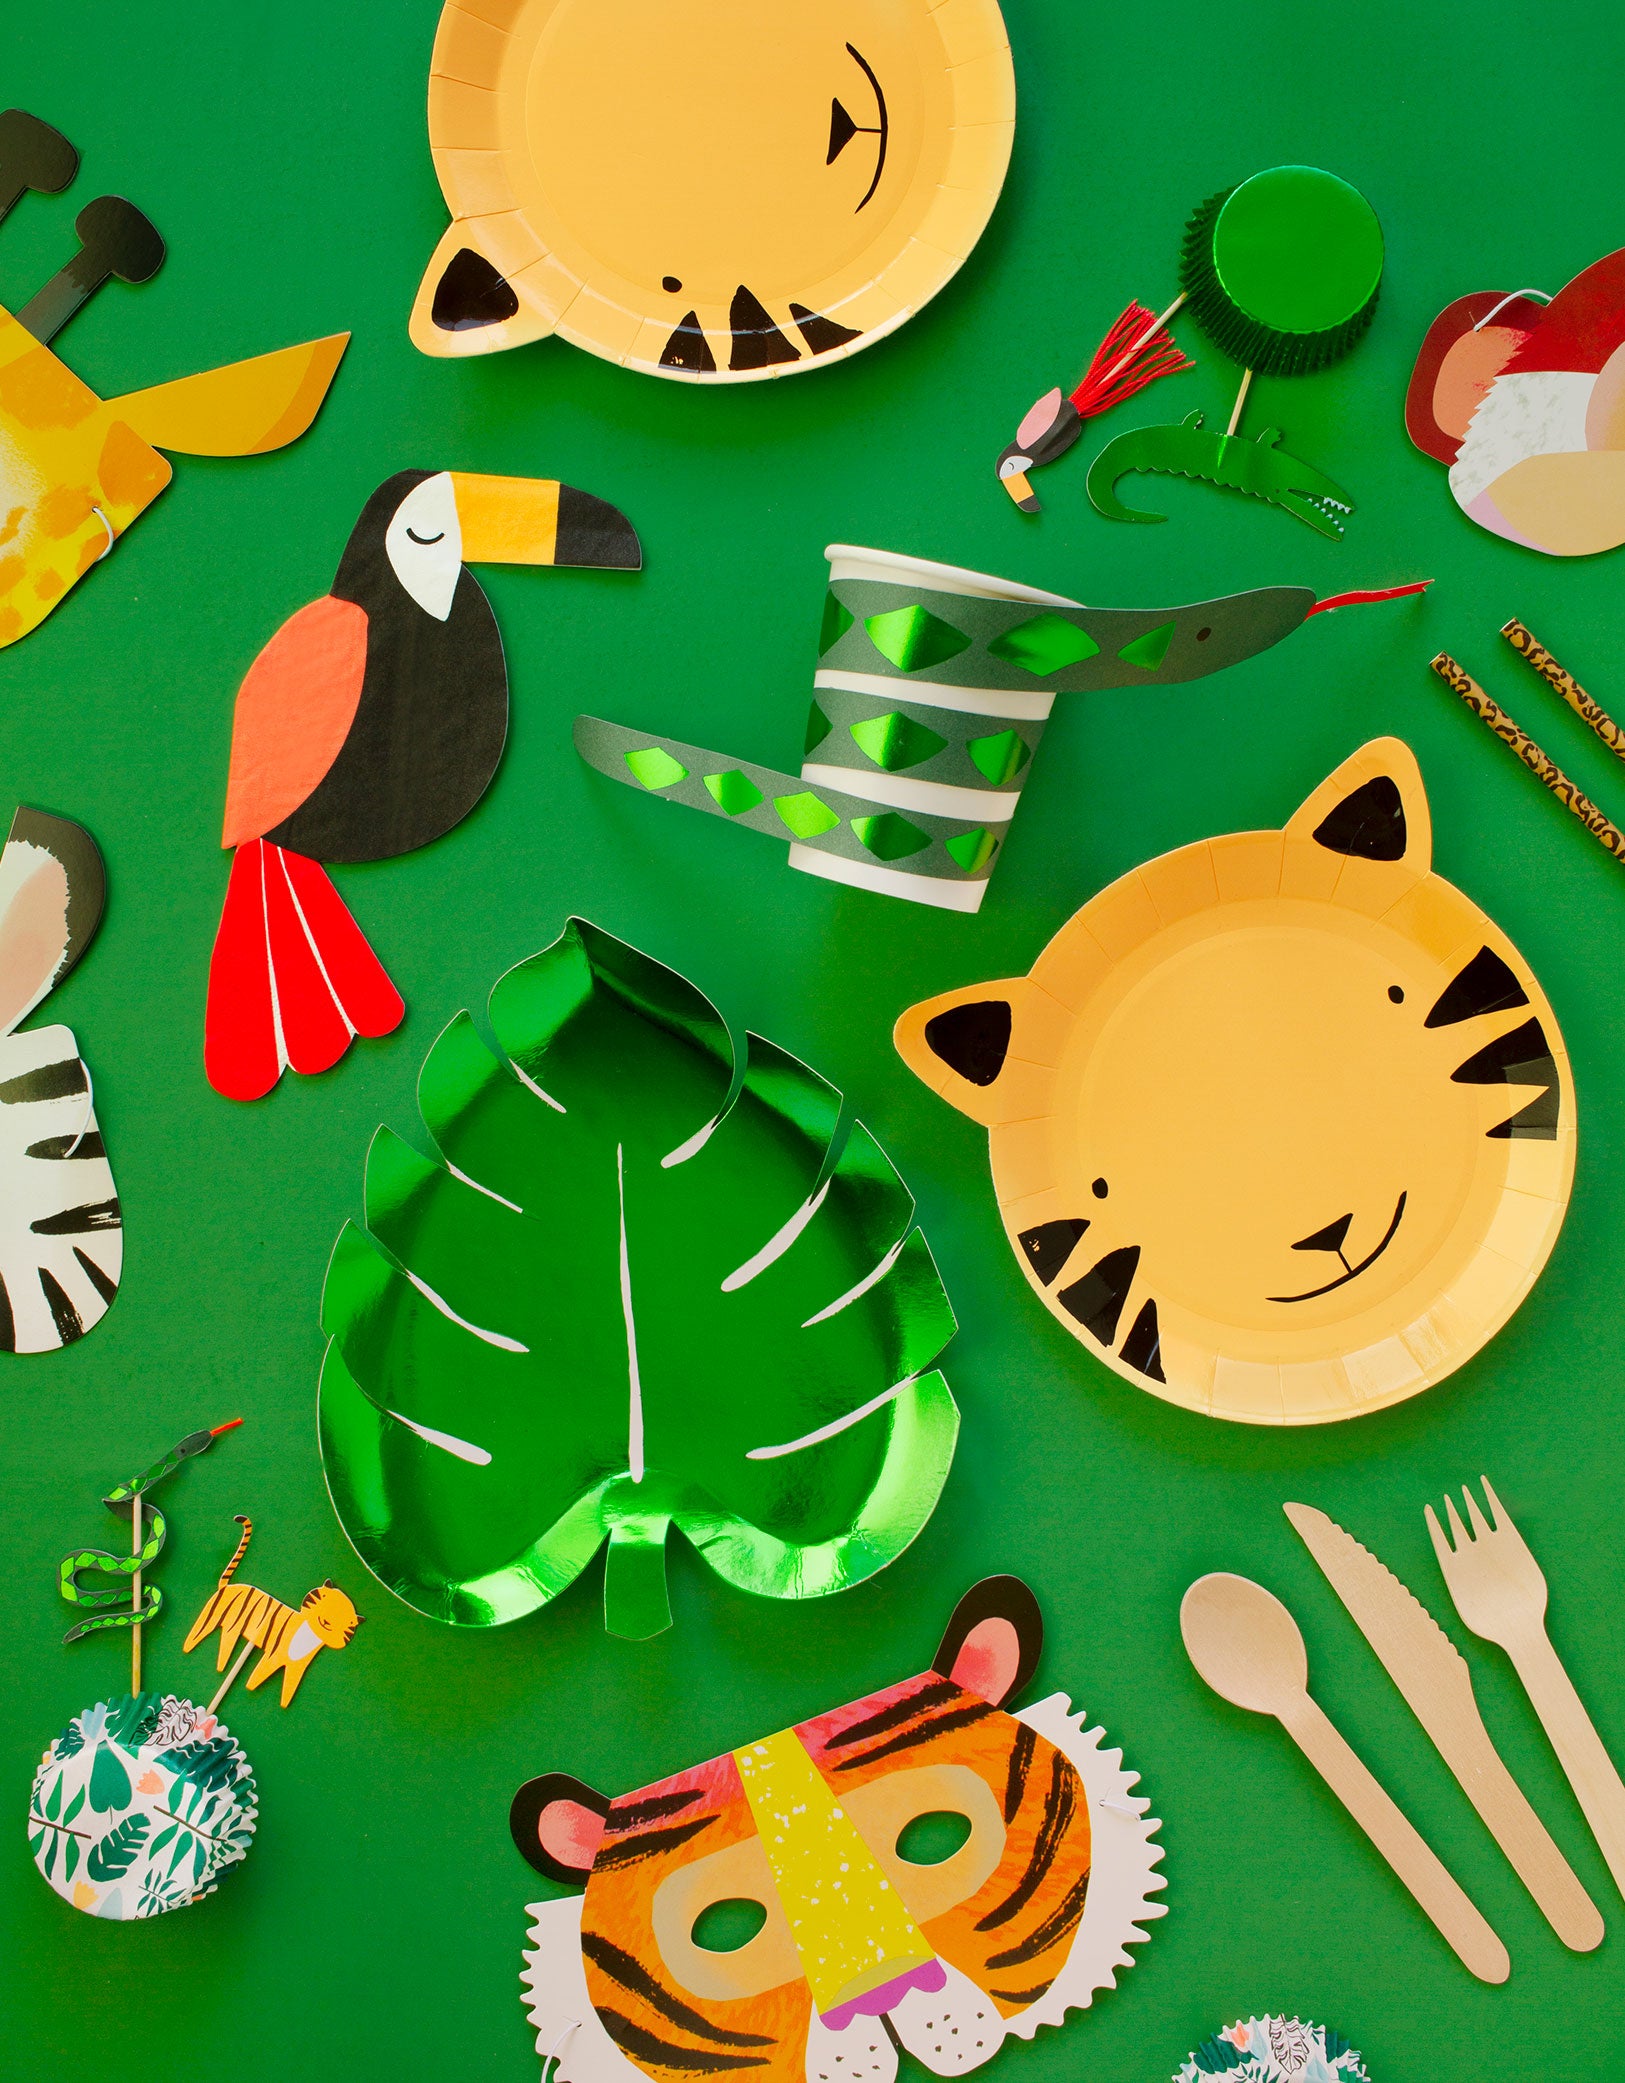 Meri Meri Party wares of Green Palm Leaf shaped Foil Paper Plate, Tiger paper plate, Toucan Napkin, Snake cup, Safari animal cupcake toper with green foil cupcake sleeve, Animal party masks for jungle party supplies all in a box, for kids safari theme fun birthday